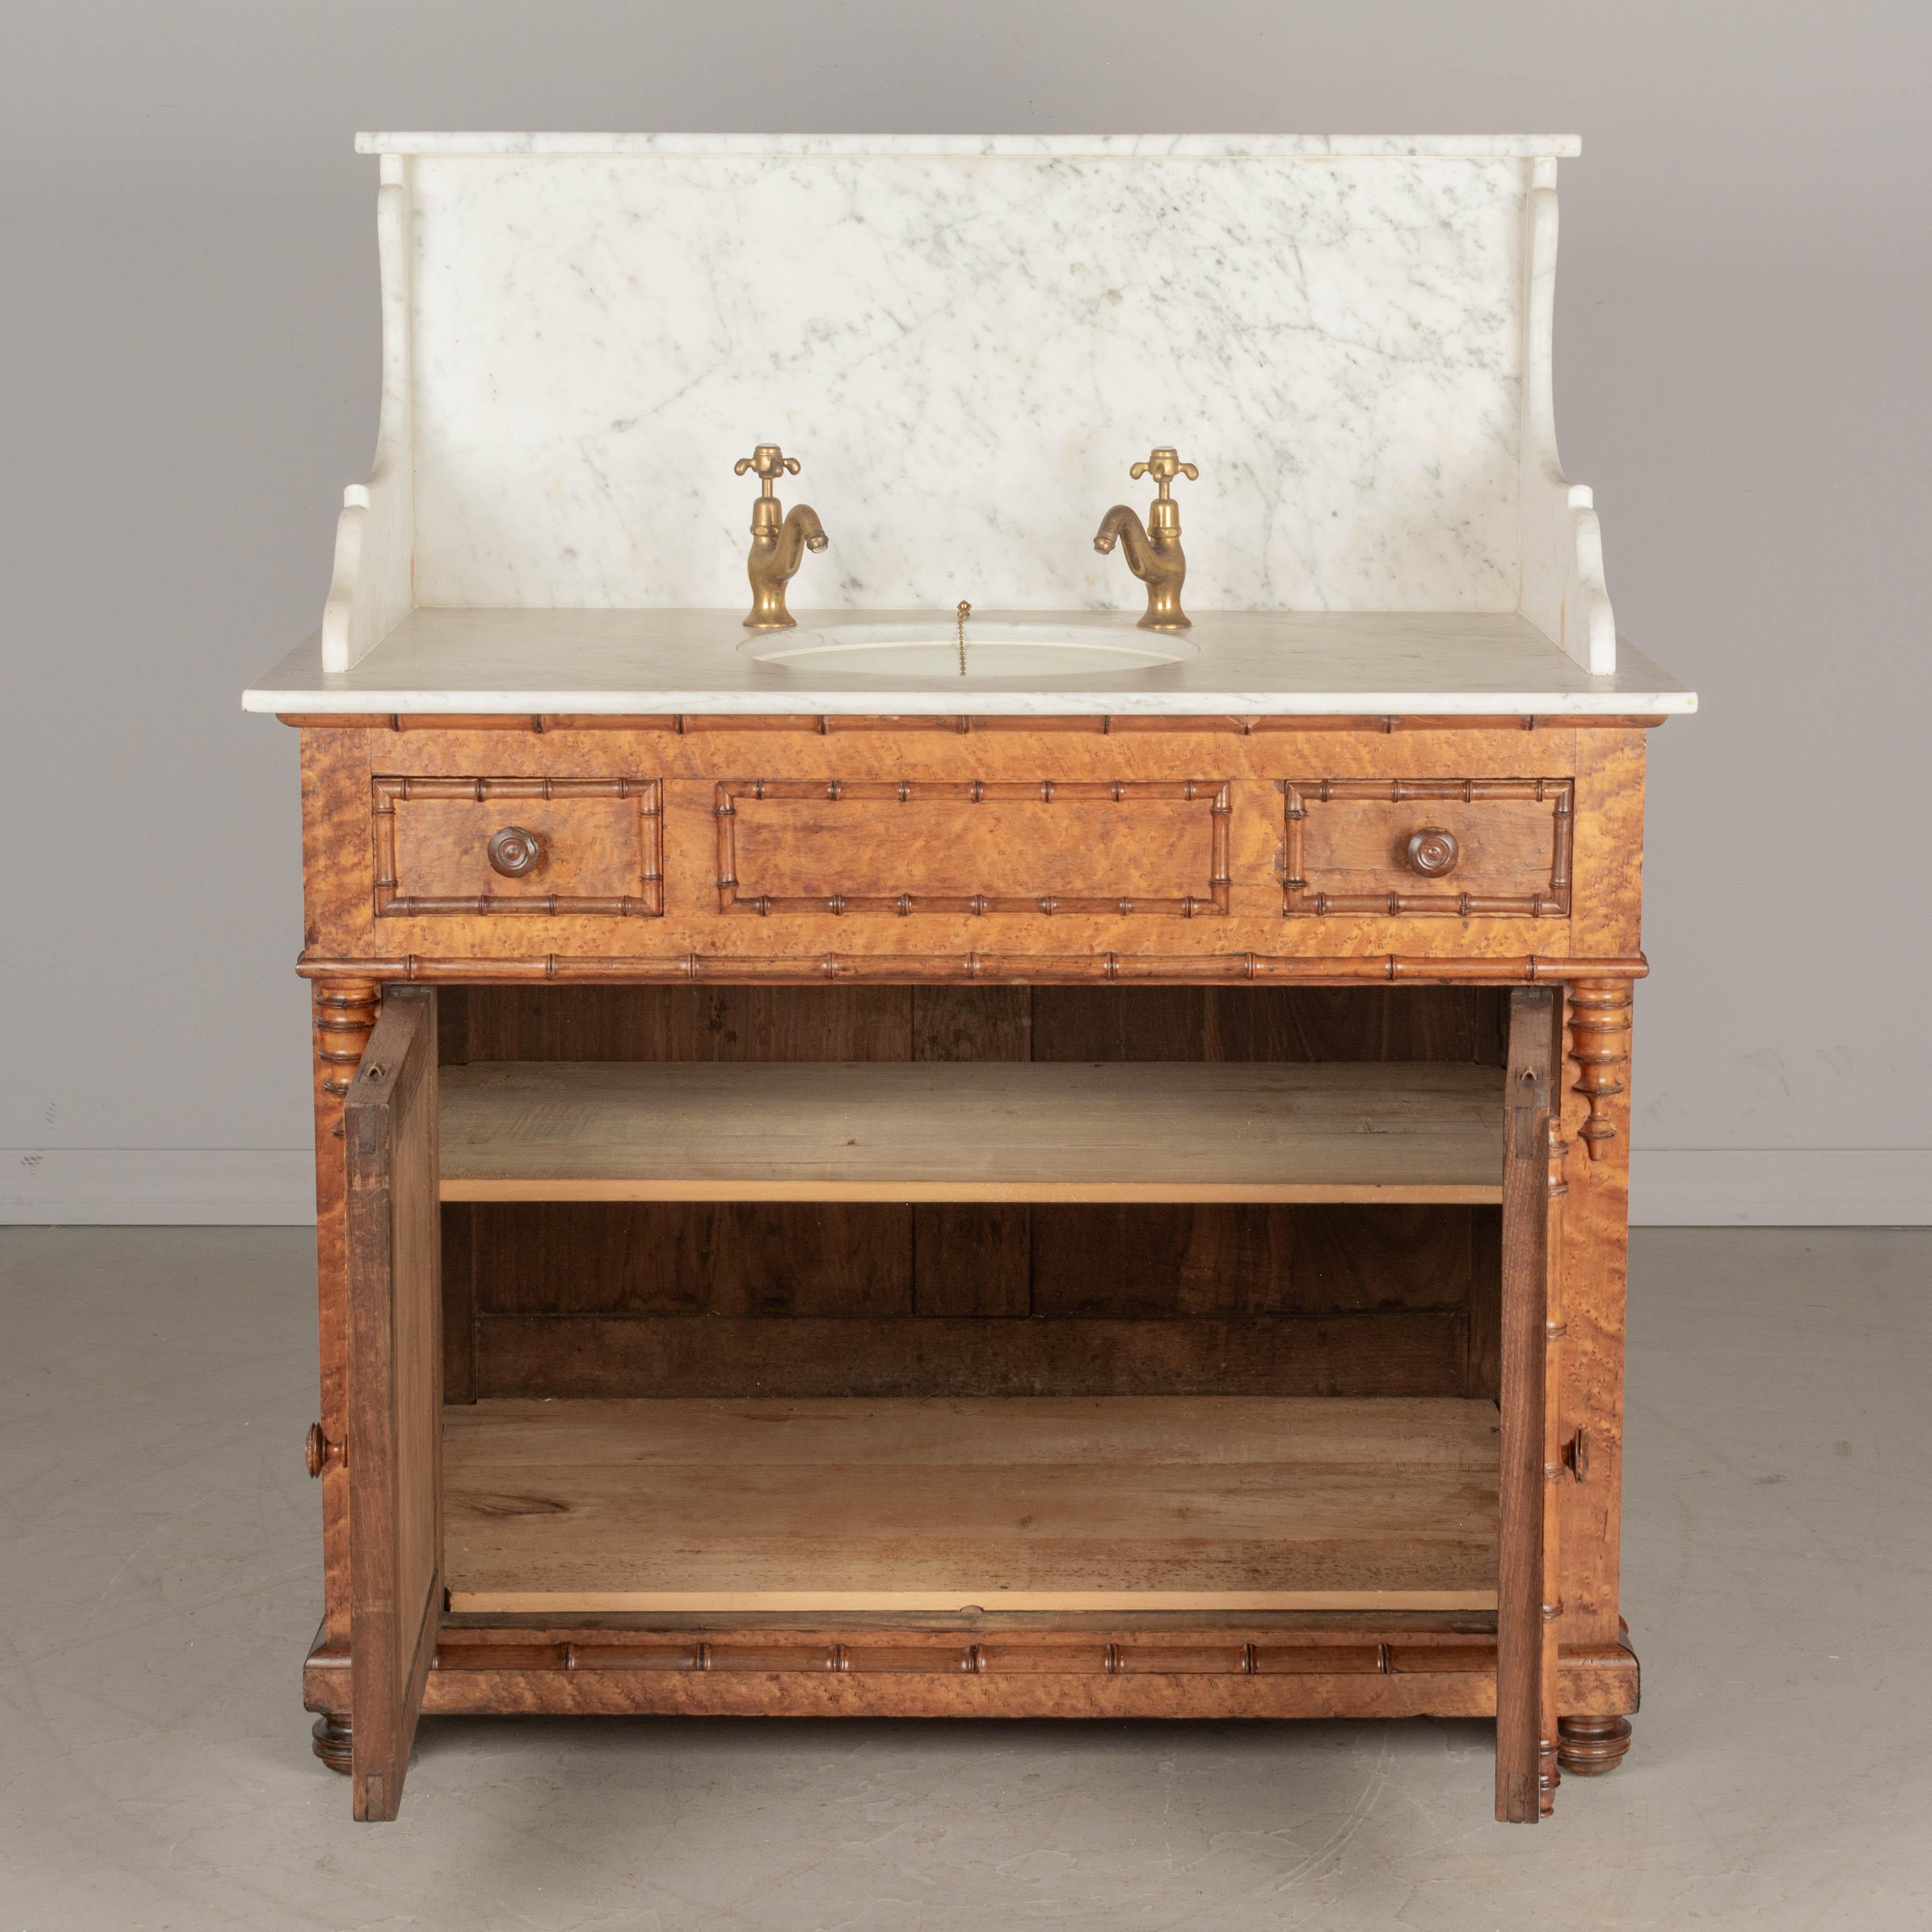 20th Century 19th Century French Faux Bamboo Marble Top Bathroom Vanity